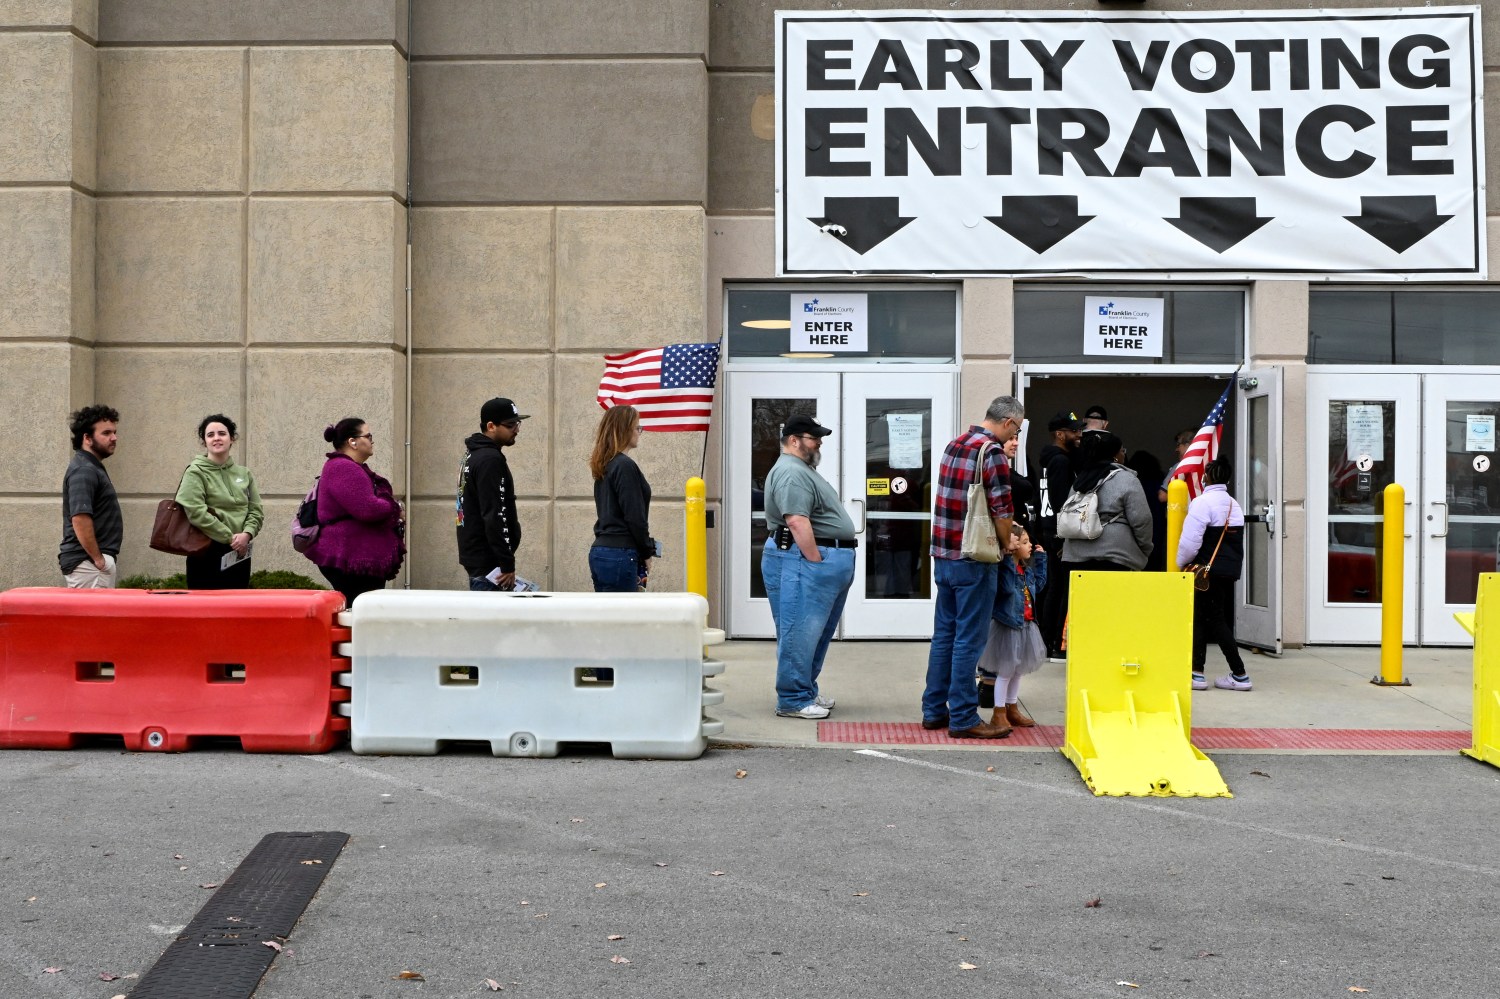 Residents wait in line to cast their ballots for the 2022 midterm election at the Franklin County Board of Elections during early voting hours in Columbus, Ohio, U.S., November 5, 2022.  REUTERS/Gaelen Morse